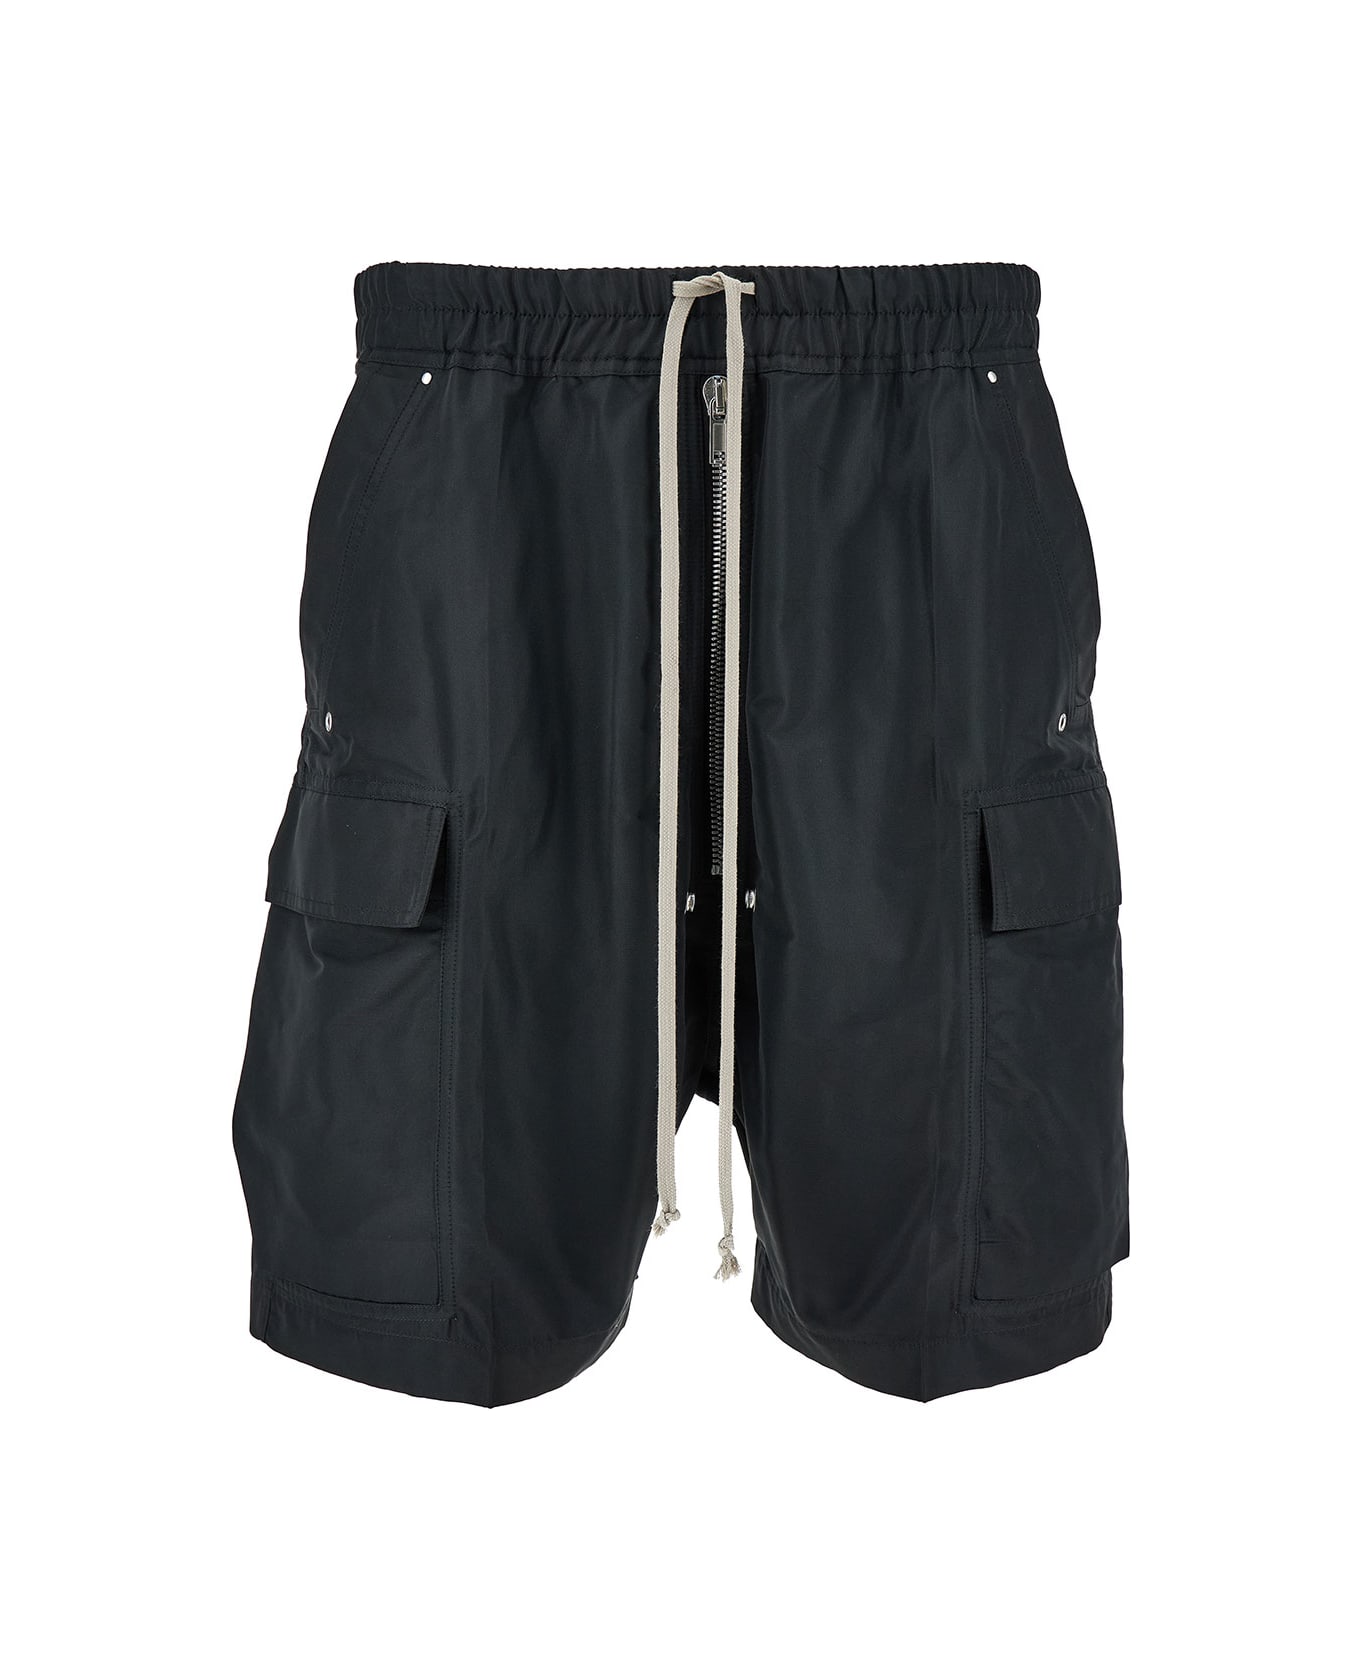 Rick Owens Black Bermuda Shorts With Drawstring And Patch Pockets In Tech Fabric Man - Black